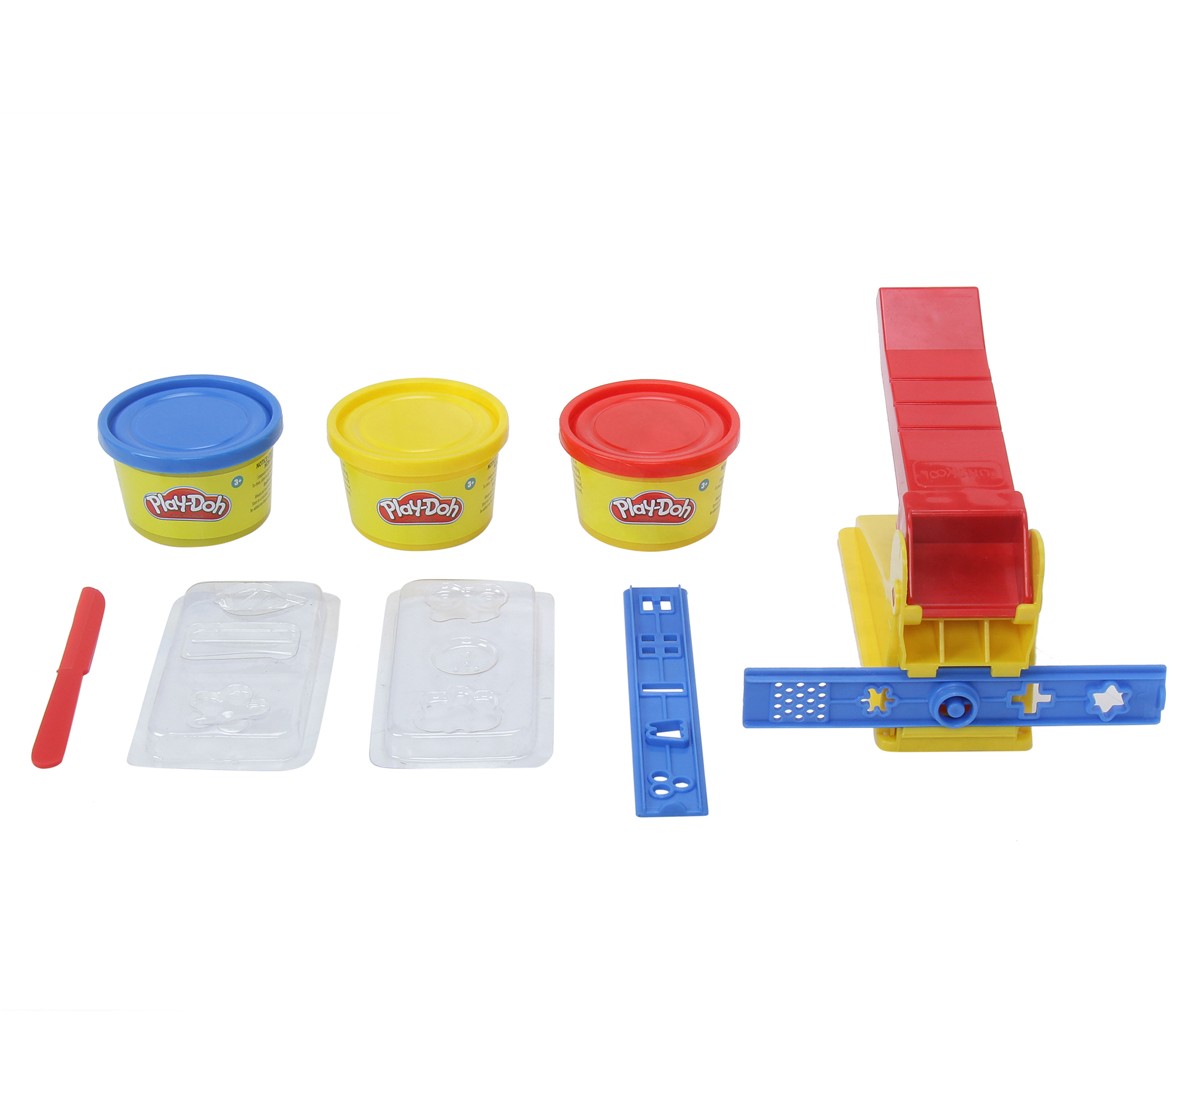 Play Doh Fun Factory Toolset Arts and Crafts Toy for Kids 3Y+, Multicolour